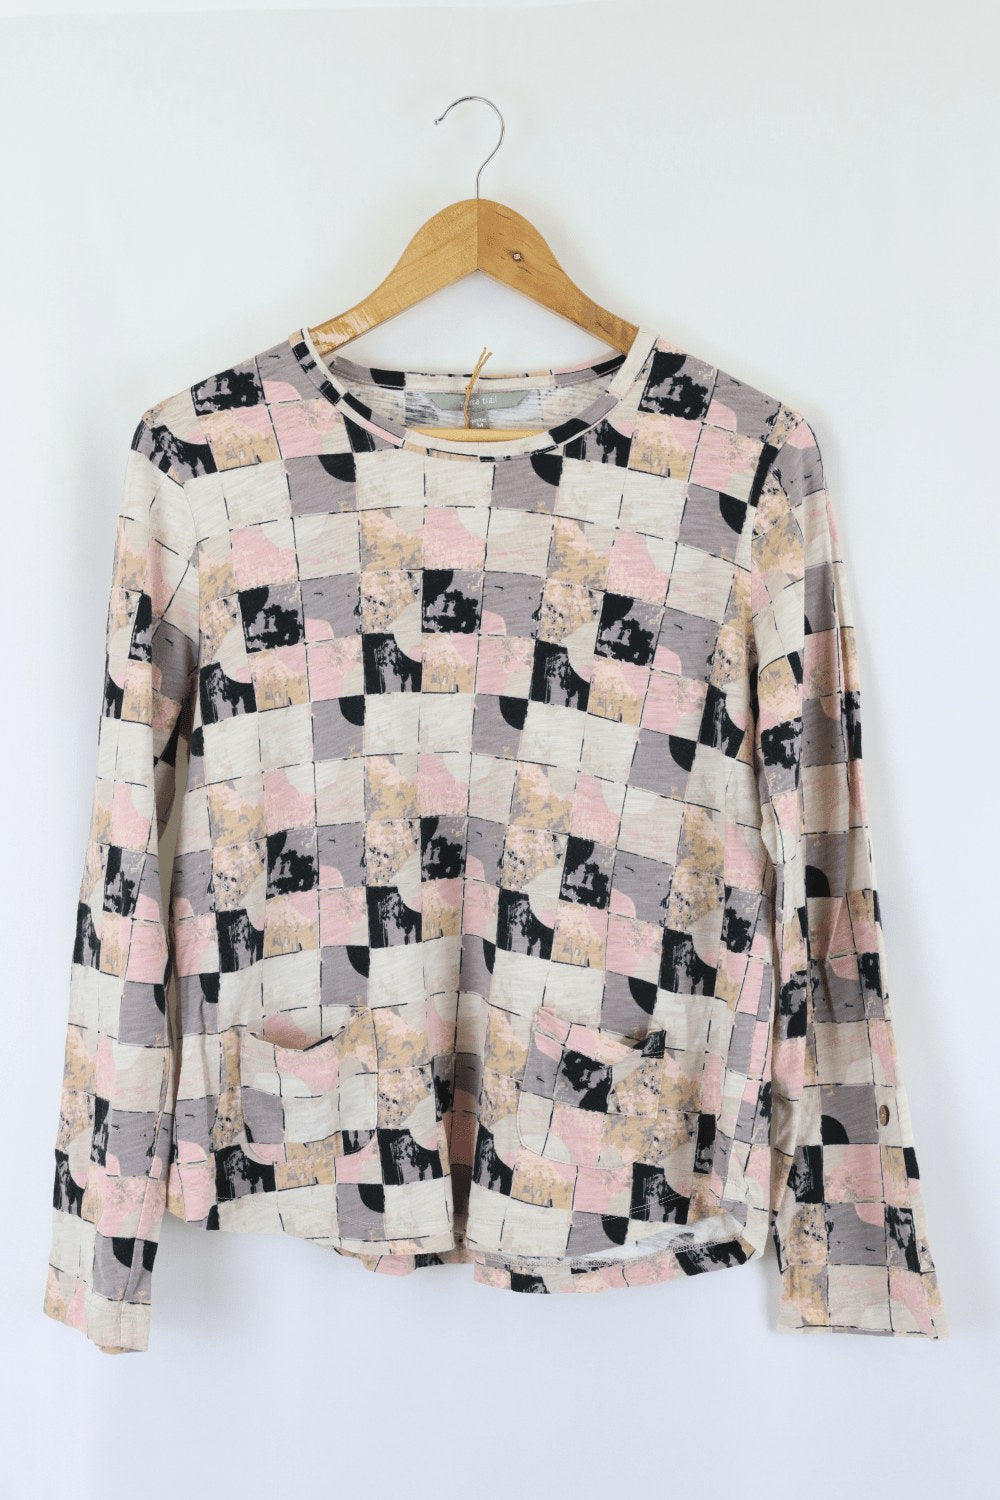 Yarra Trail Pink Square Top M